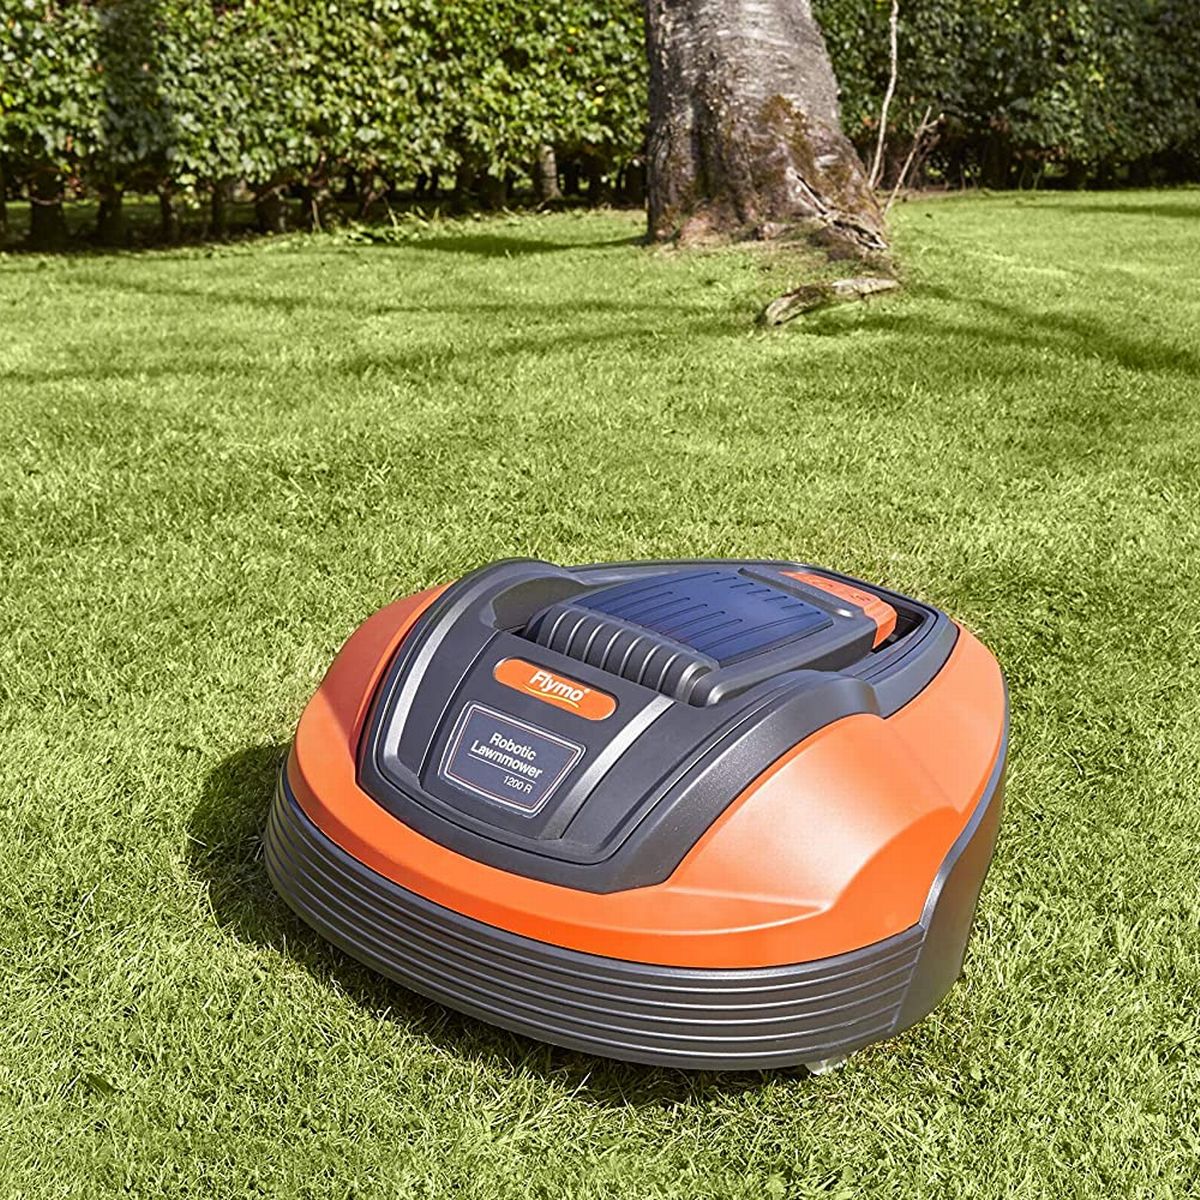 Find the Best Robotic Lawn Mowers For Home Use